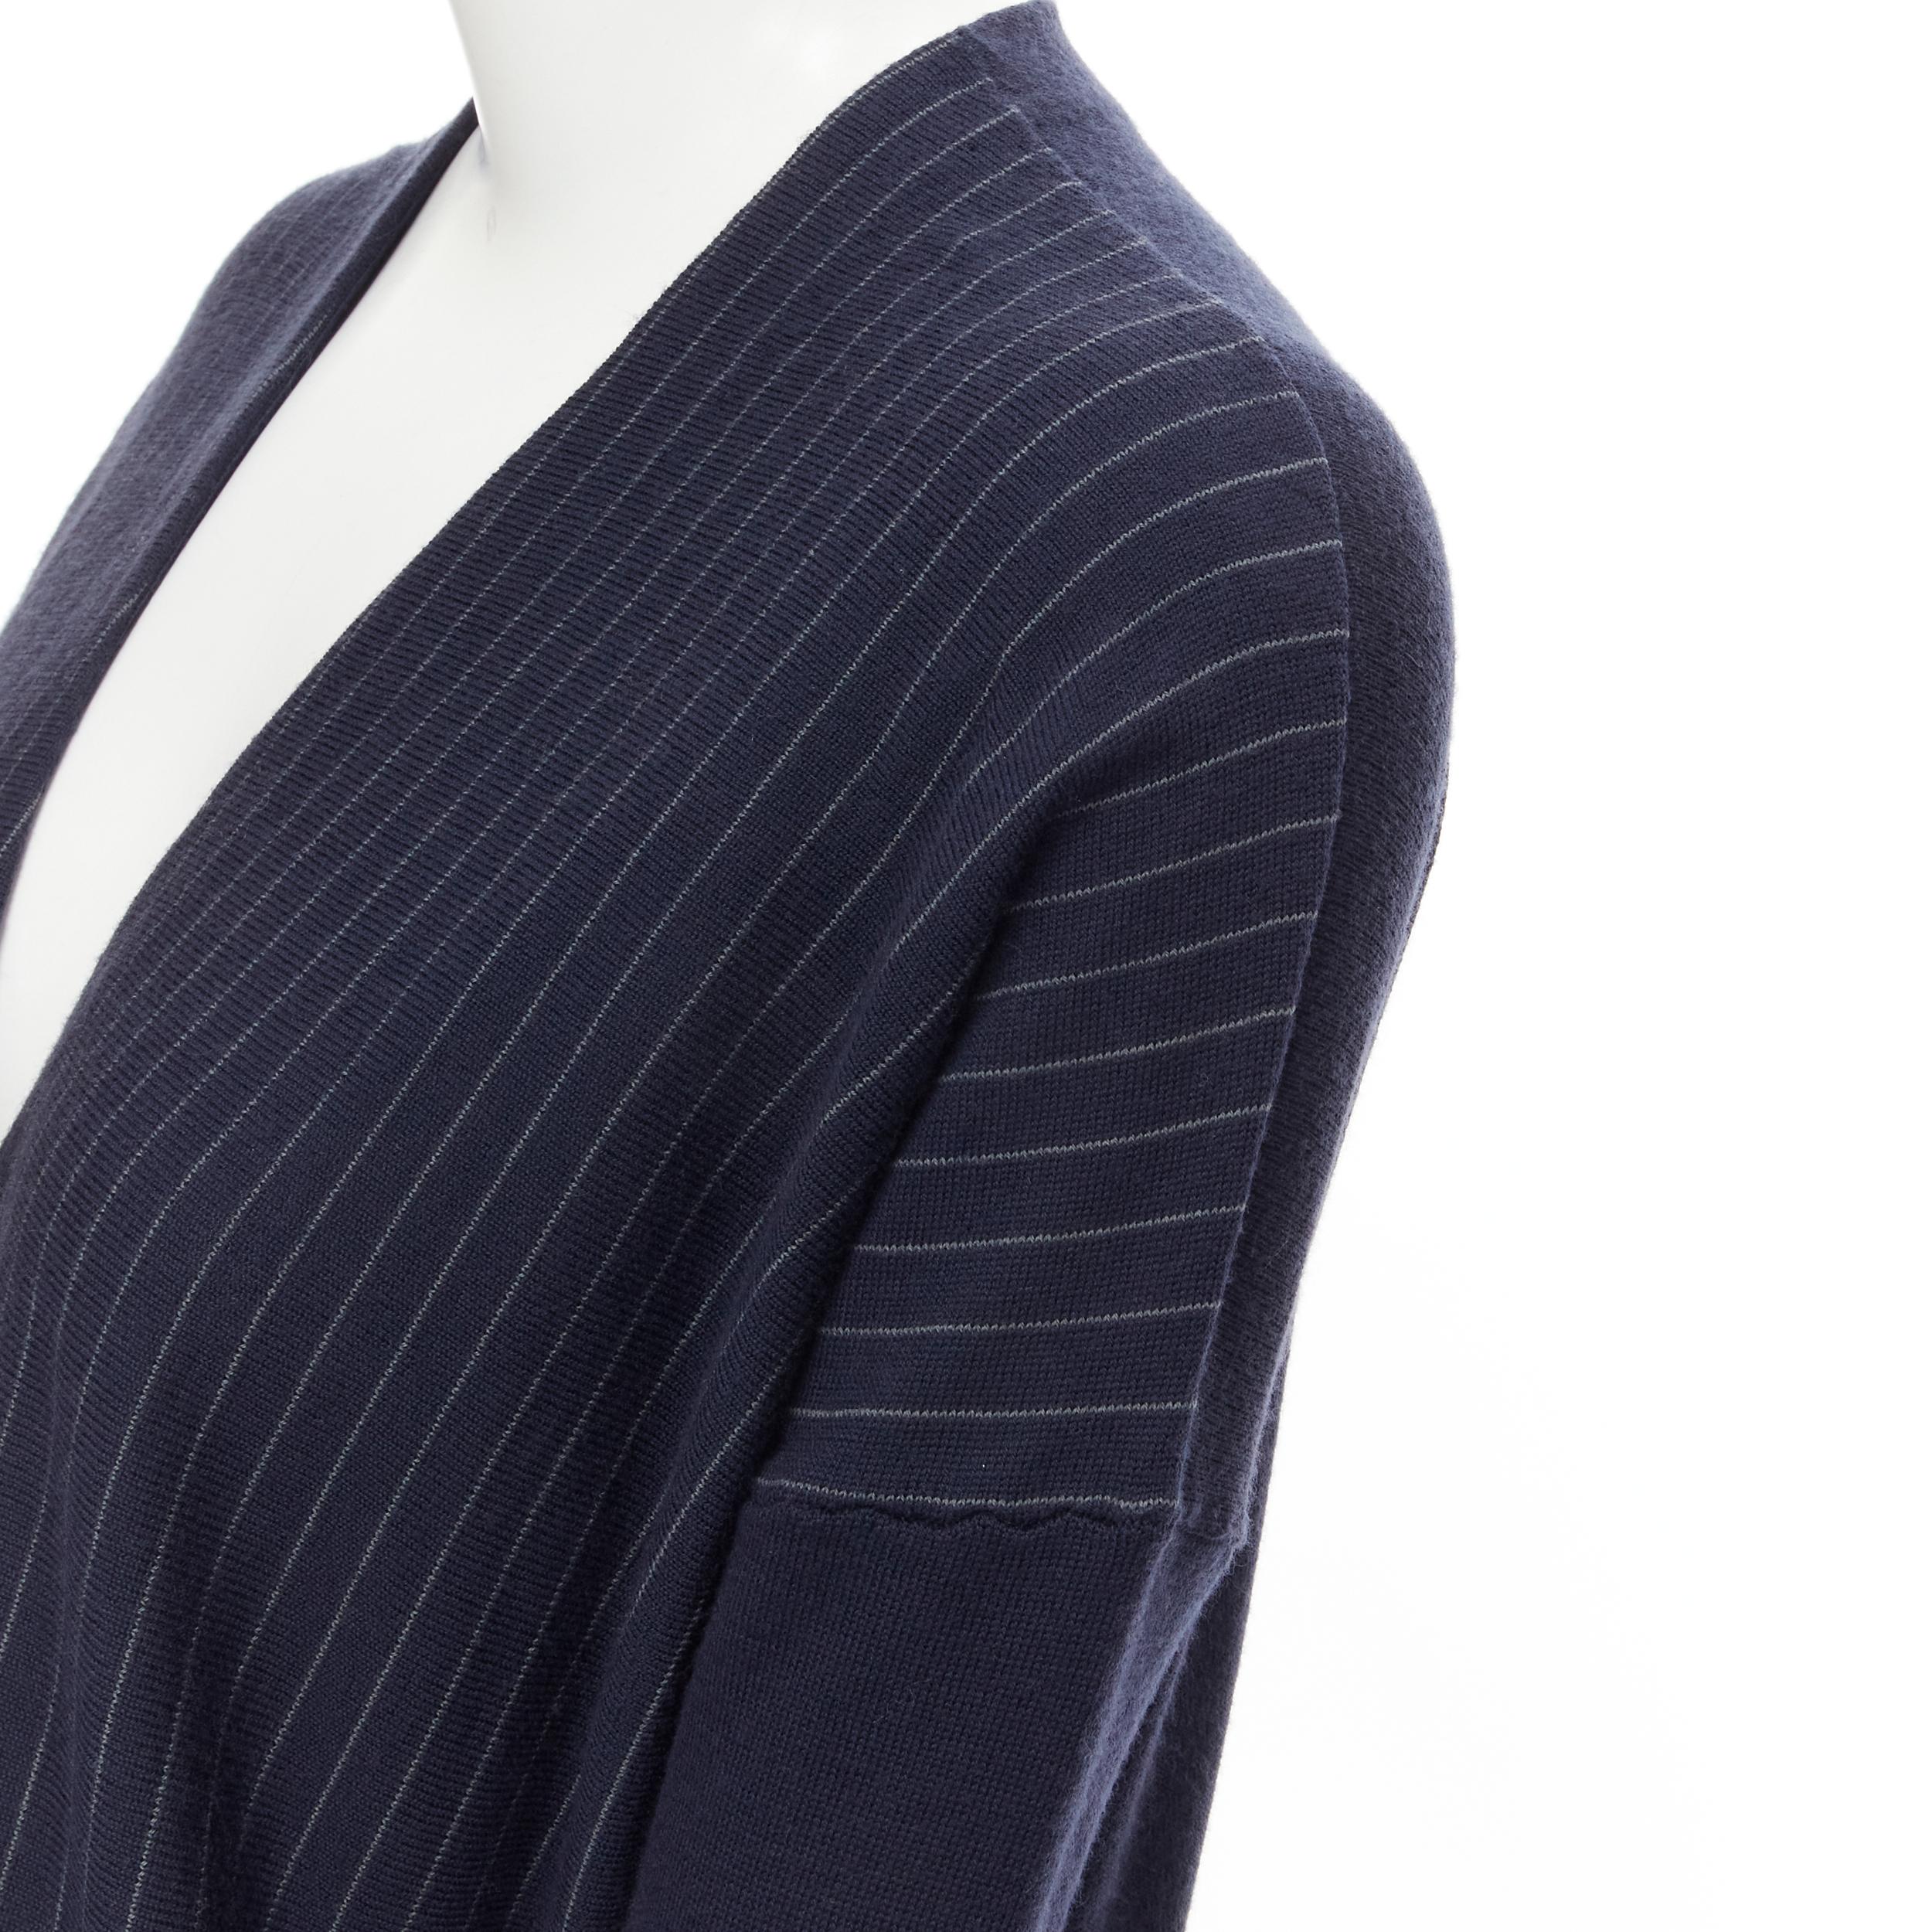 THE ROW navy blue pinstripe silver mirrored button long length cardigan XS 
Reference: MELK/A00055 
Brand: The Row 
Color: Navy 
Pattern: Striped 
Closure: Button 
Extra Detail: Dropped shoulder seam. Fitted sleeves. 
Made in: USA 

CONDITION: